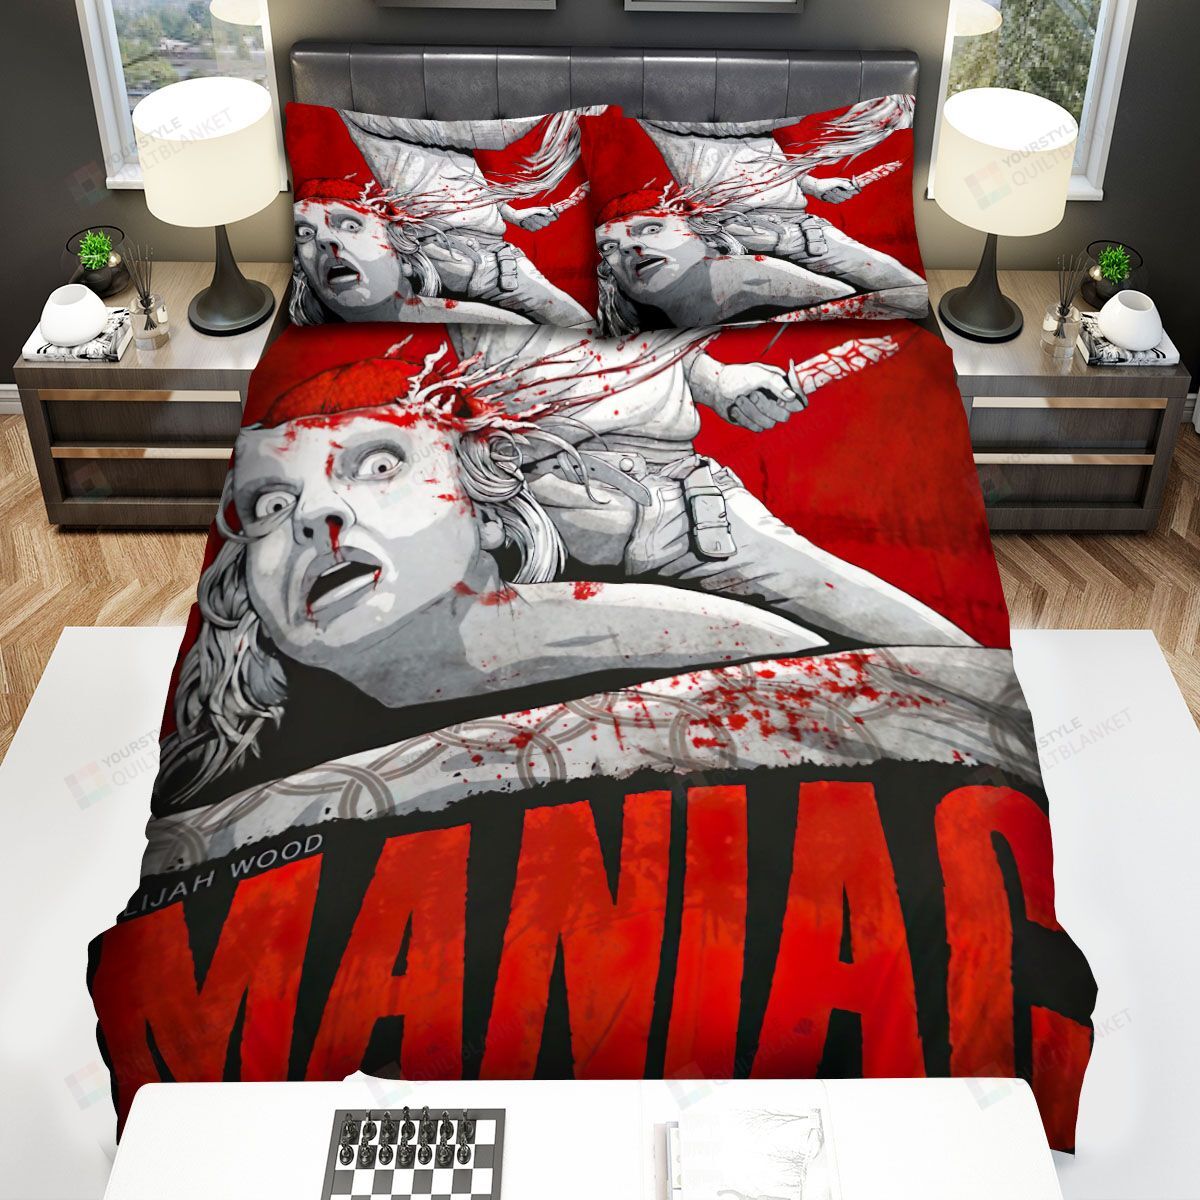 Maniac Decapitation Bed Sheets Spread Comforter Duvet Cover Bedding Sets